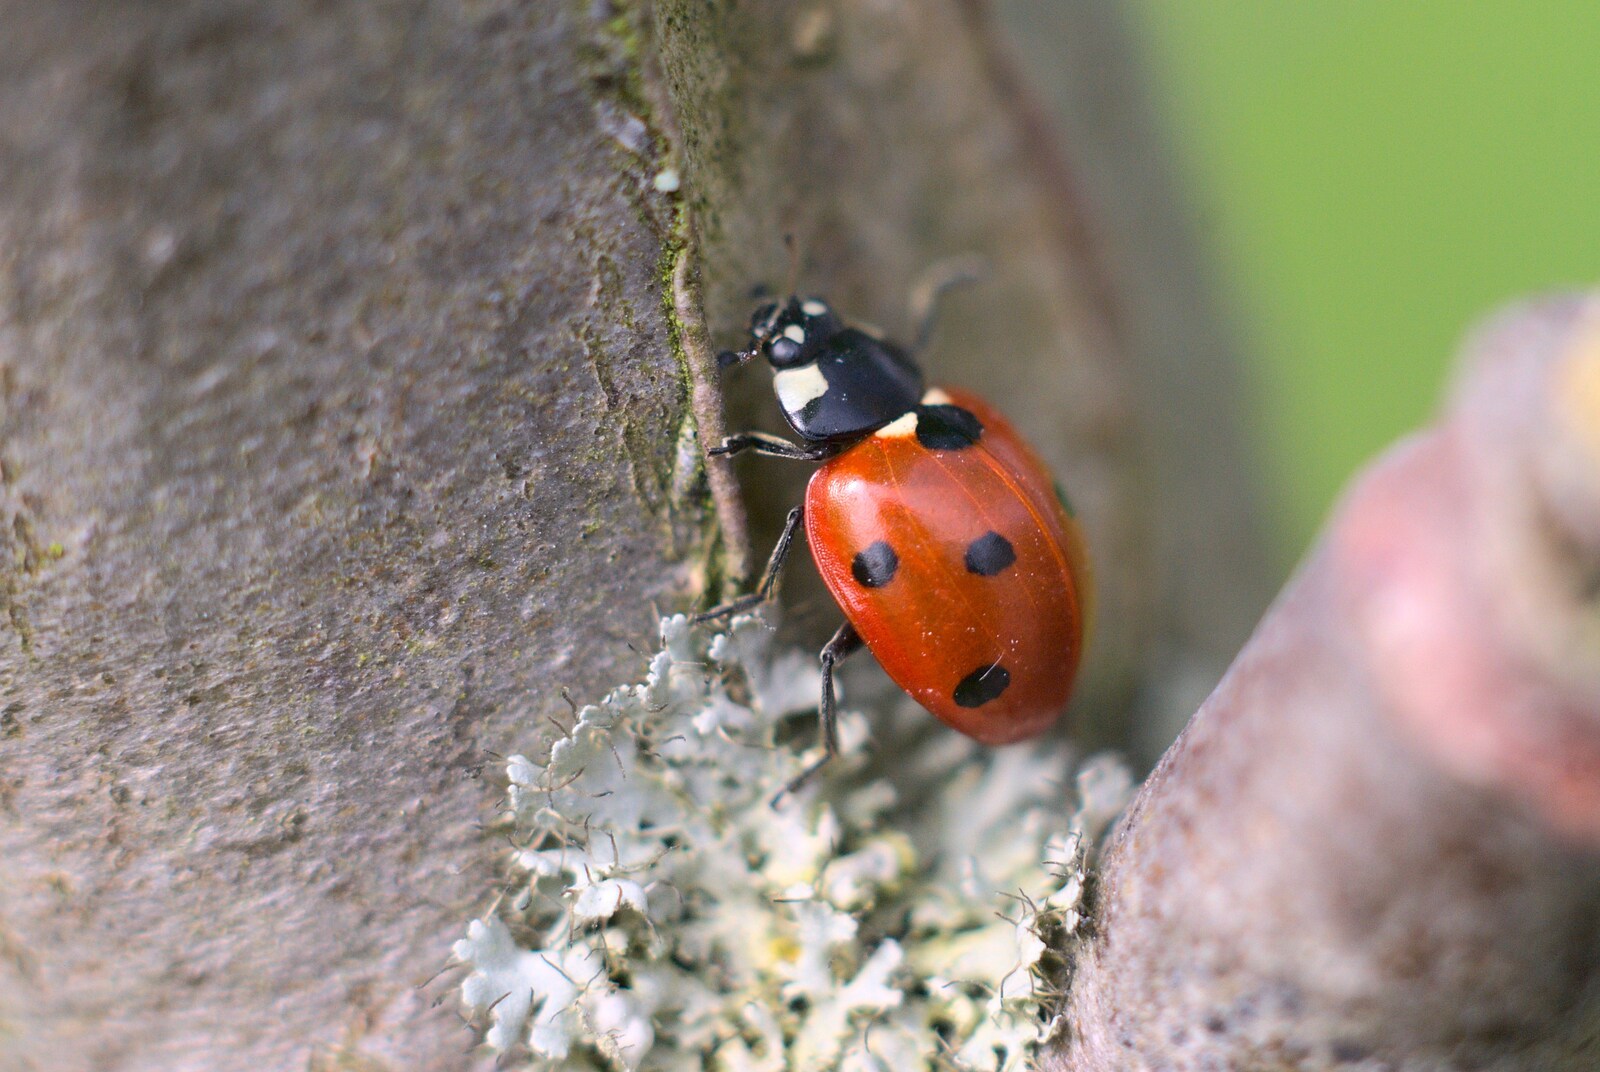 More spotty ladybird action from Bubbles and Macro Fun, Brome, Suffolk - 17th April 2011